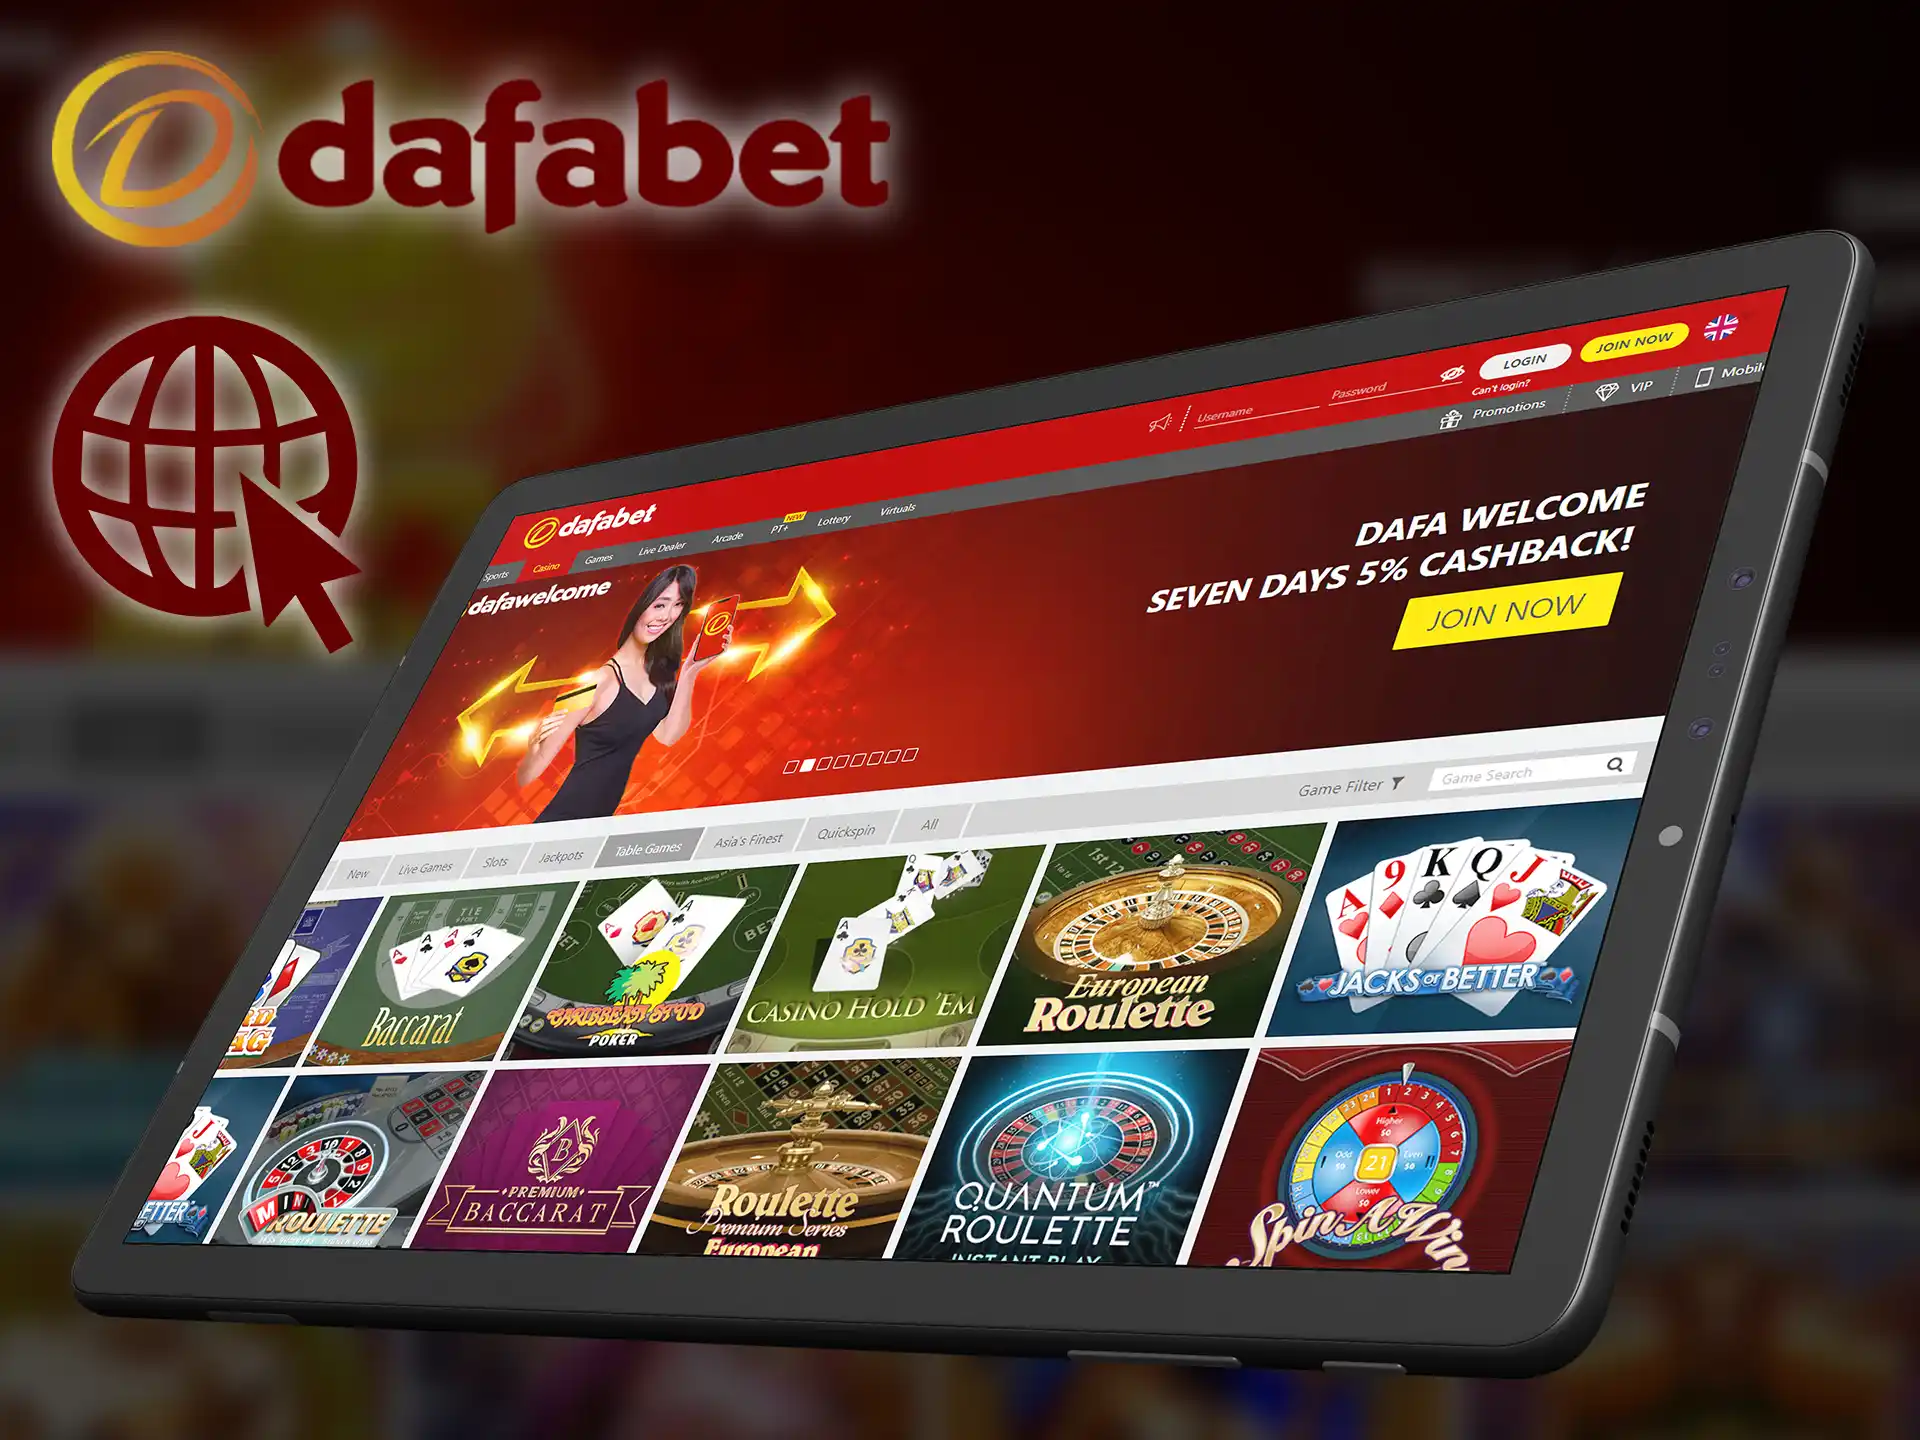 You can use all of the Dafabet website options on any device.